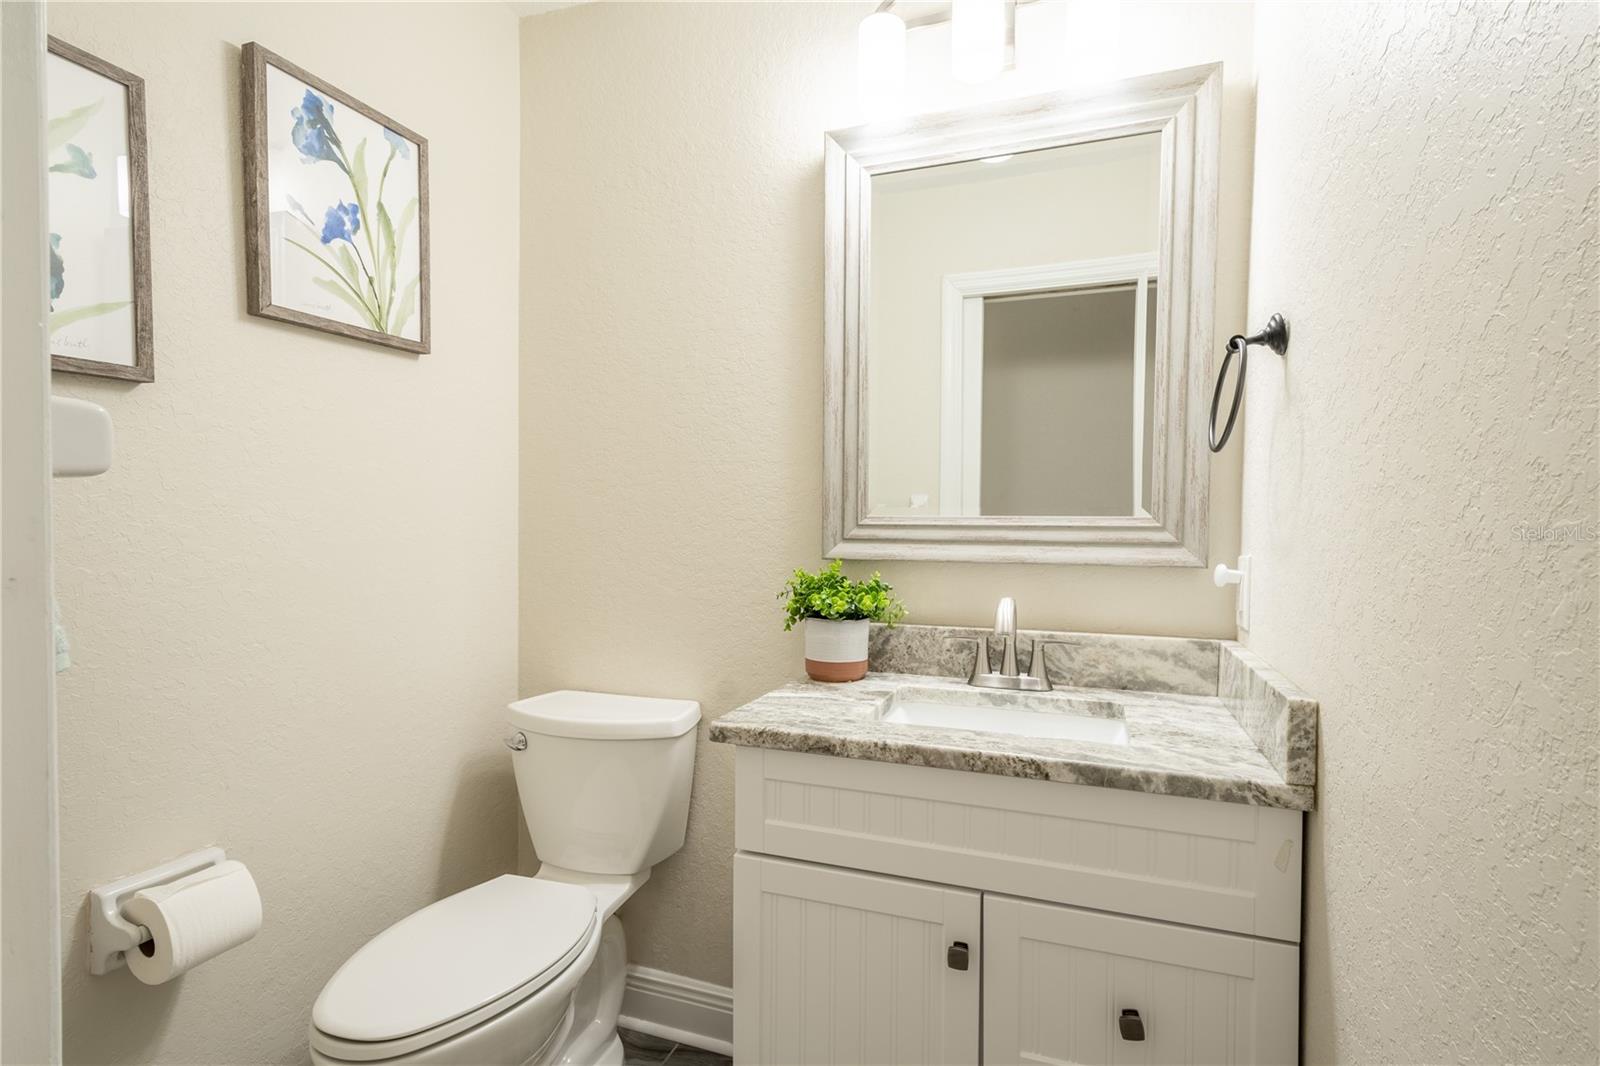 The first floor also has a powder room with a mirrored vanity with storage.